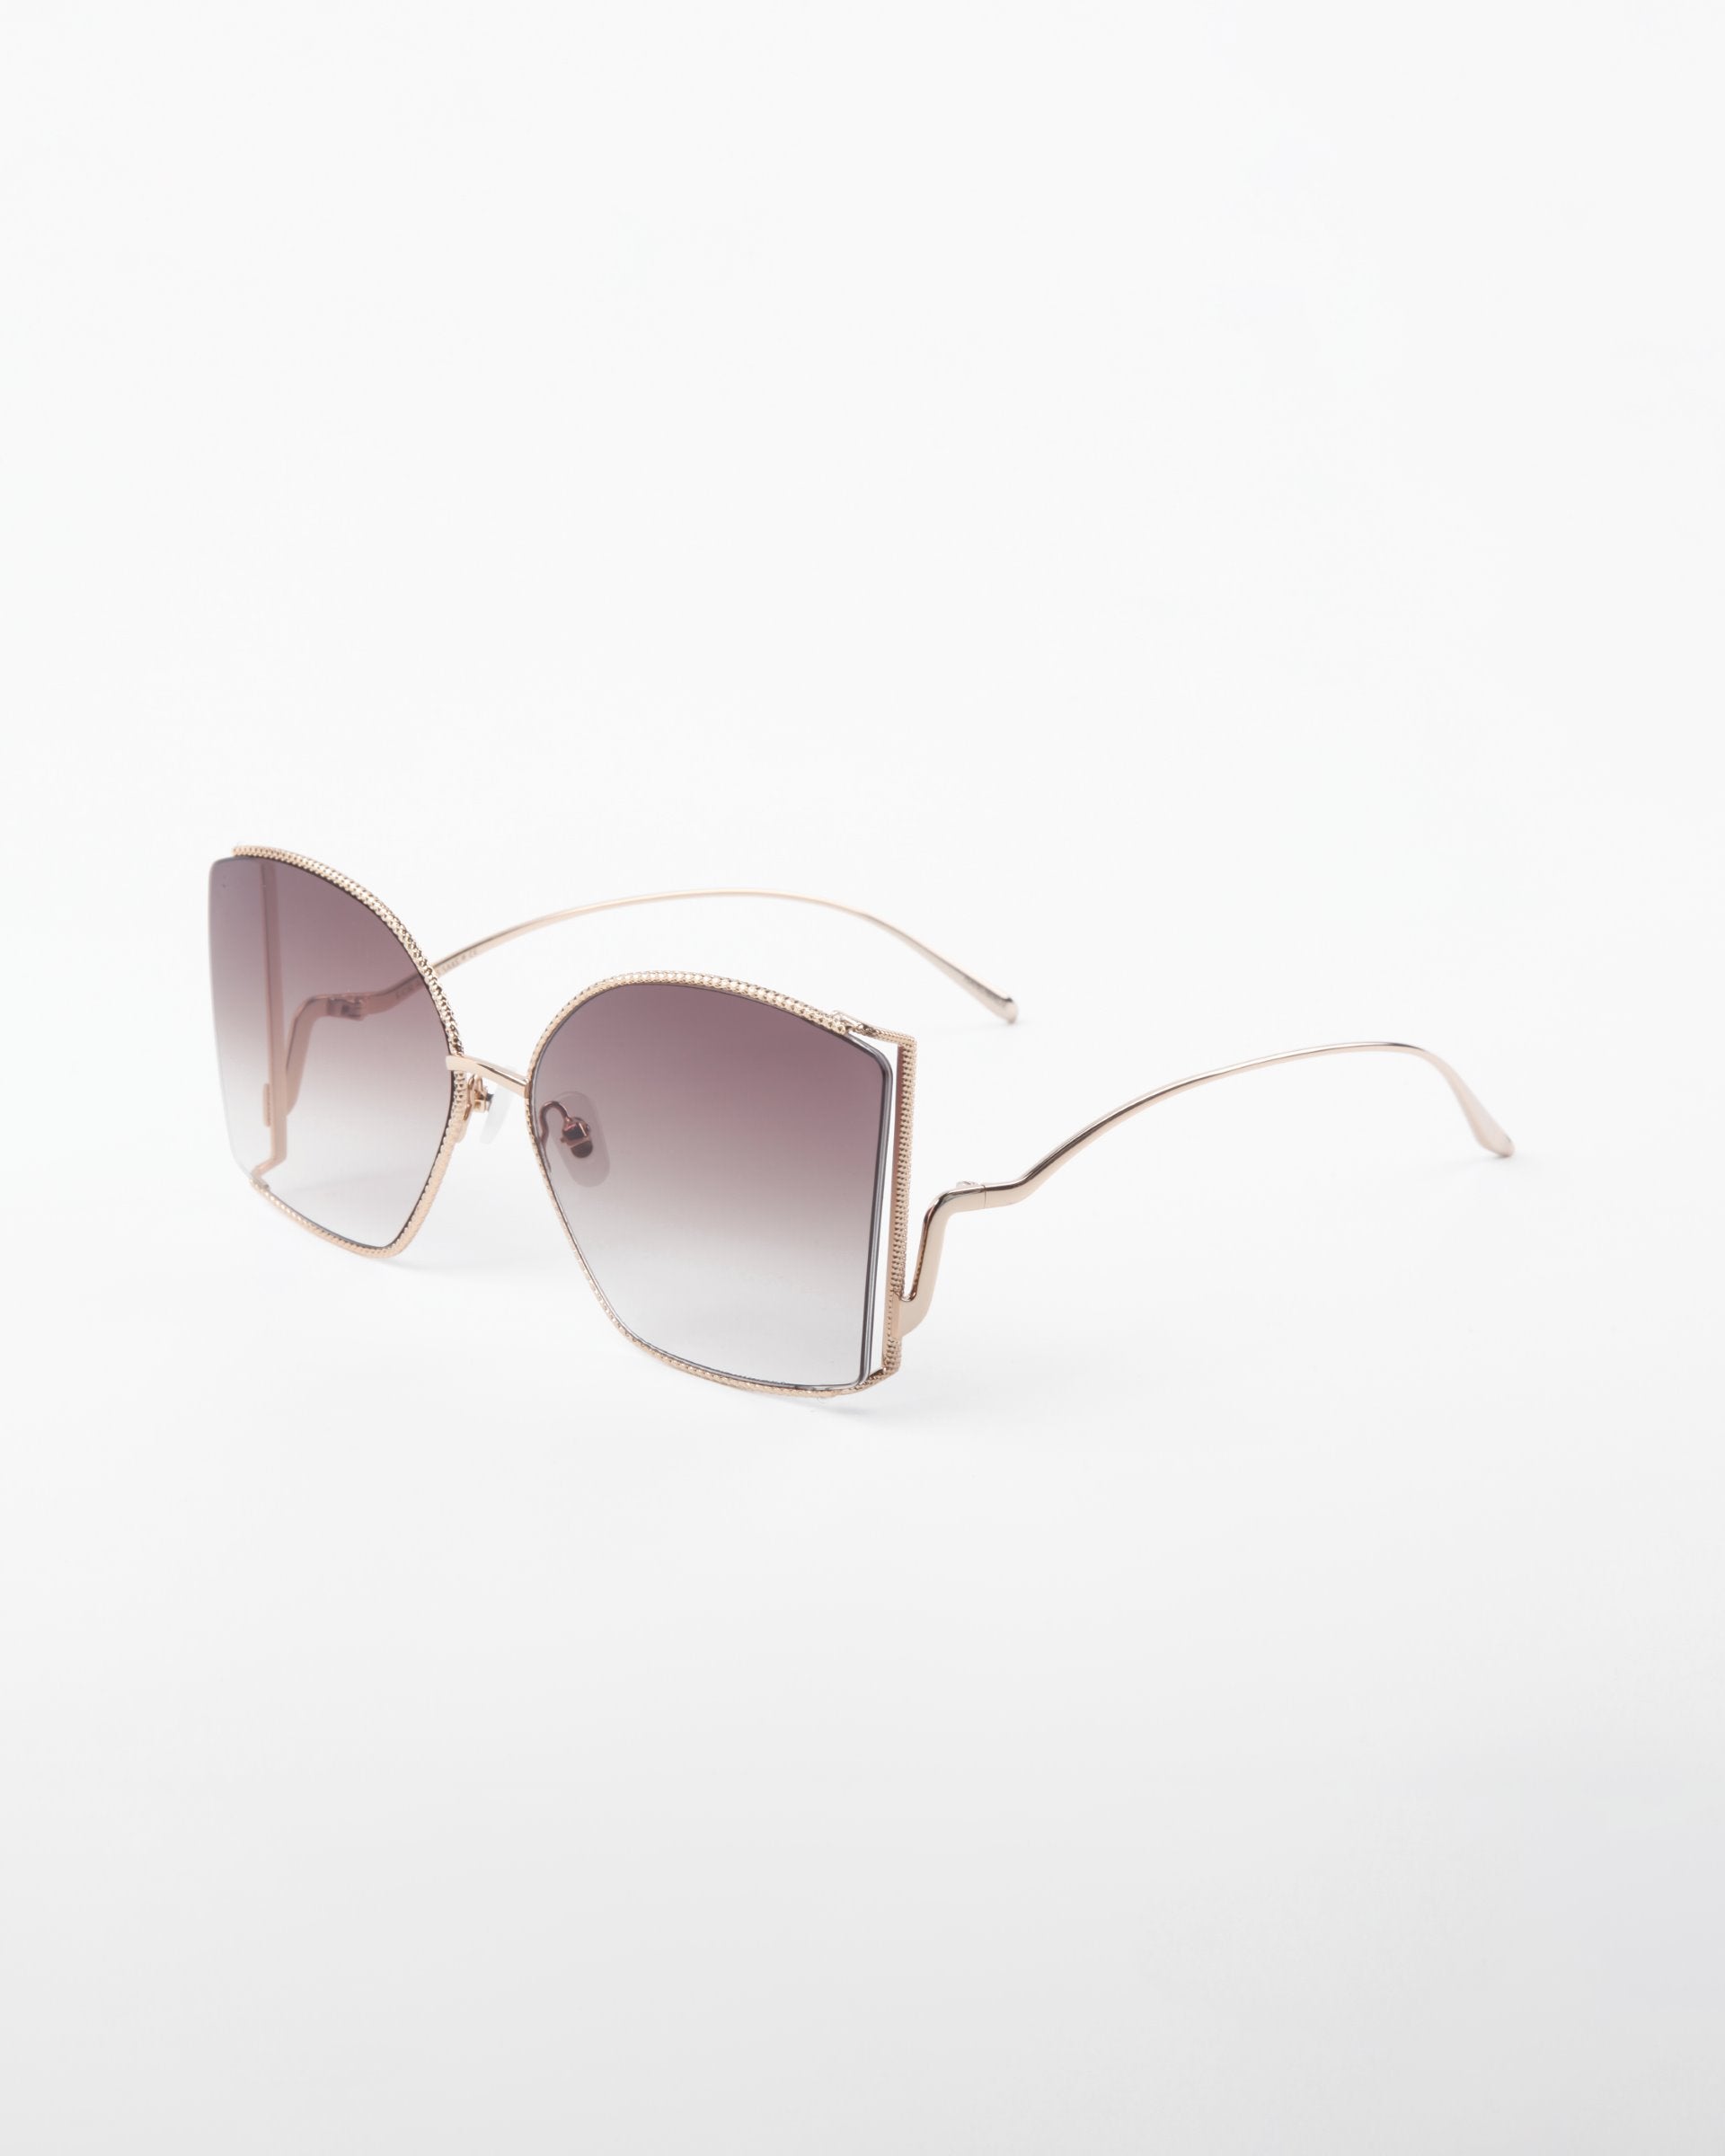 A pair of stylish, oversized For Art's Sake® Dixie sunglasses featuring UV protection and a thin, handmade gold-plated frame. The shatter-resistant nylon lenses boast a gradient fade from a darker tint at the top to a lighter tint at the bottom, with an elegant curve at the nose bridge and curved temple tips.